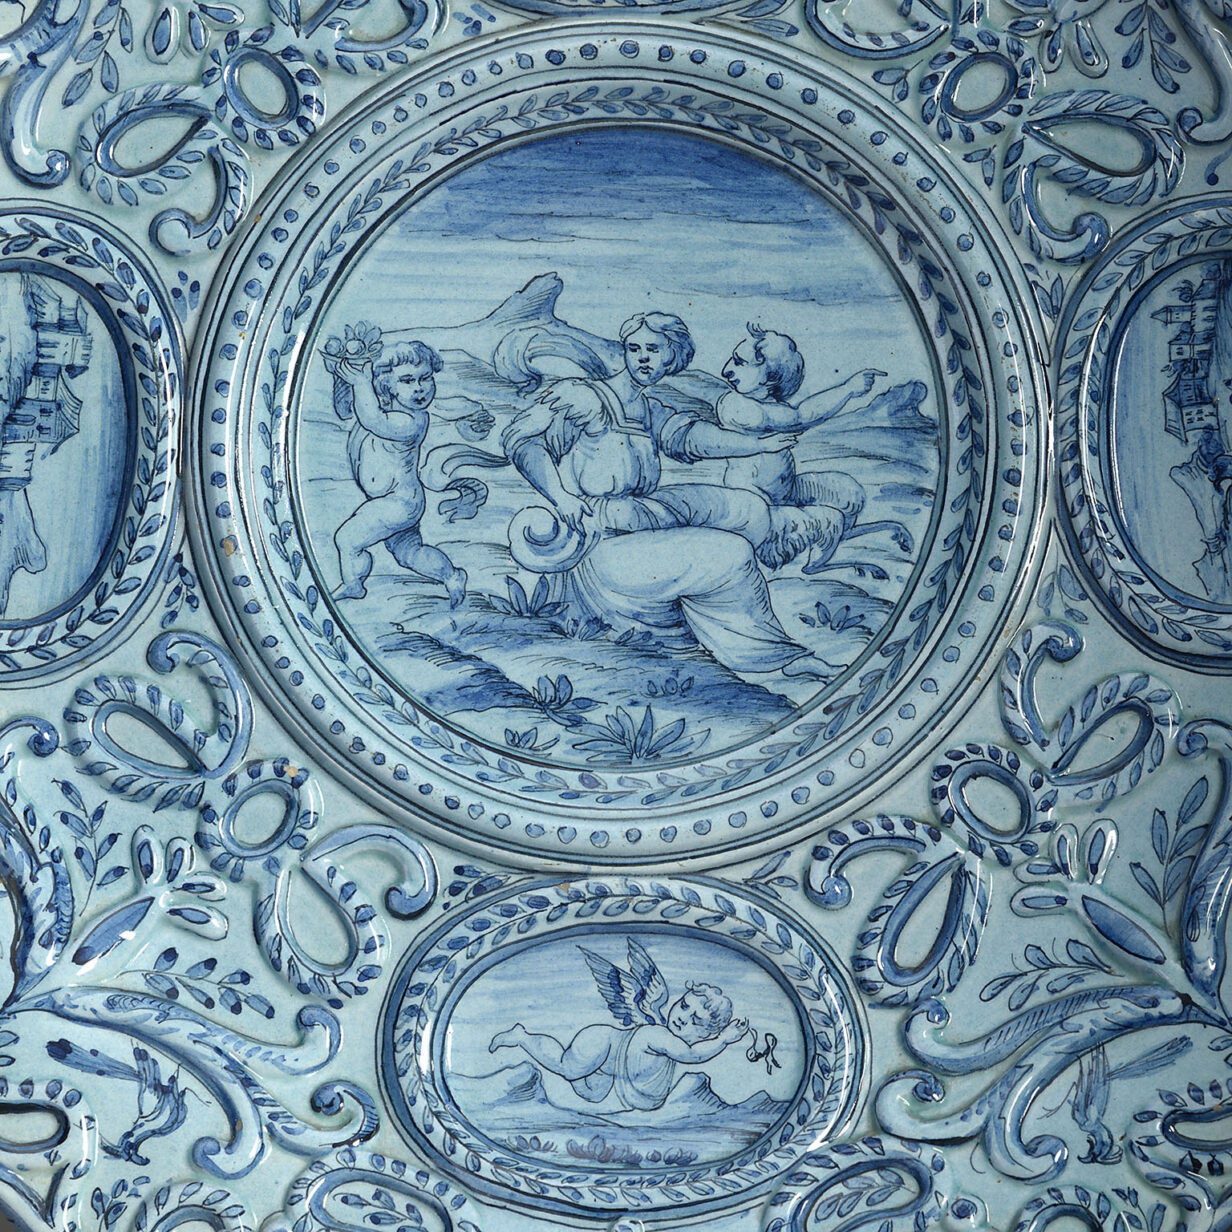 Blue and White Maiolica Charger